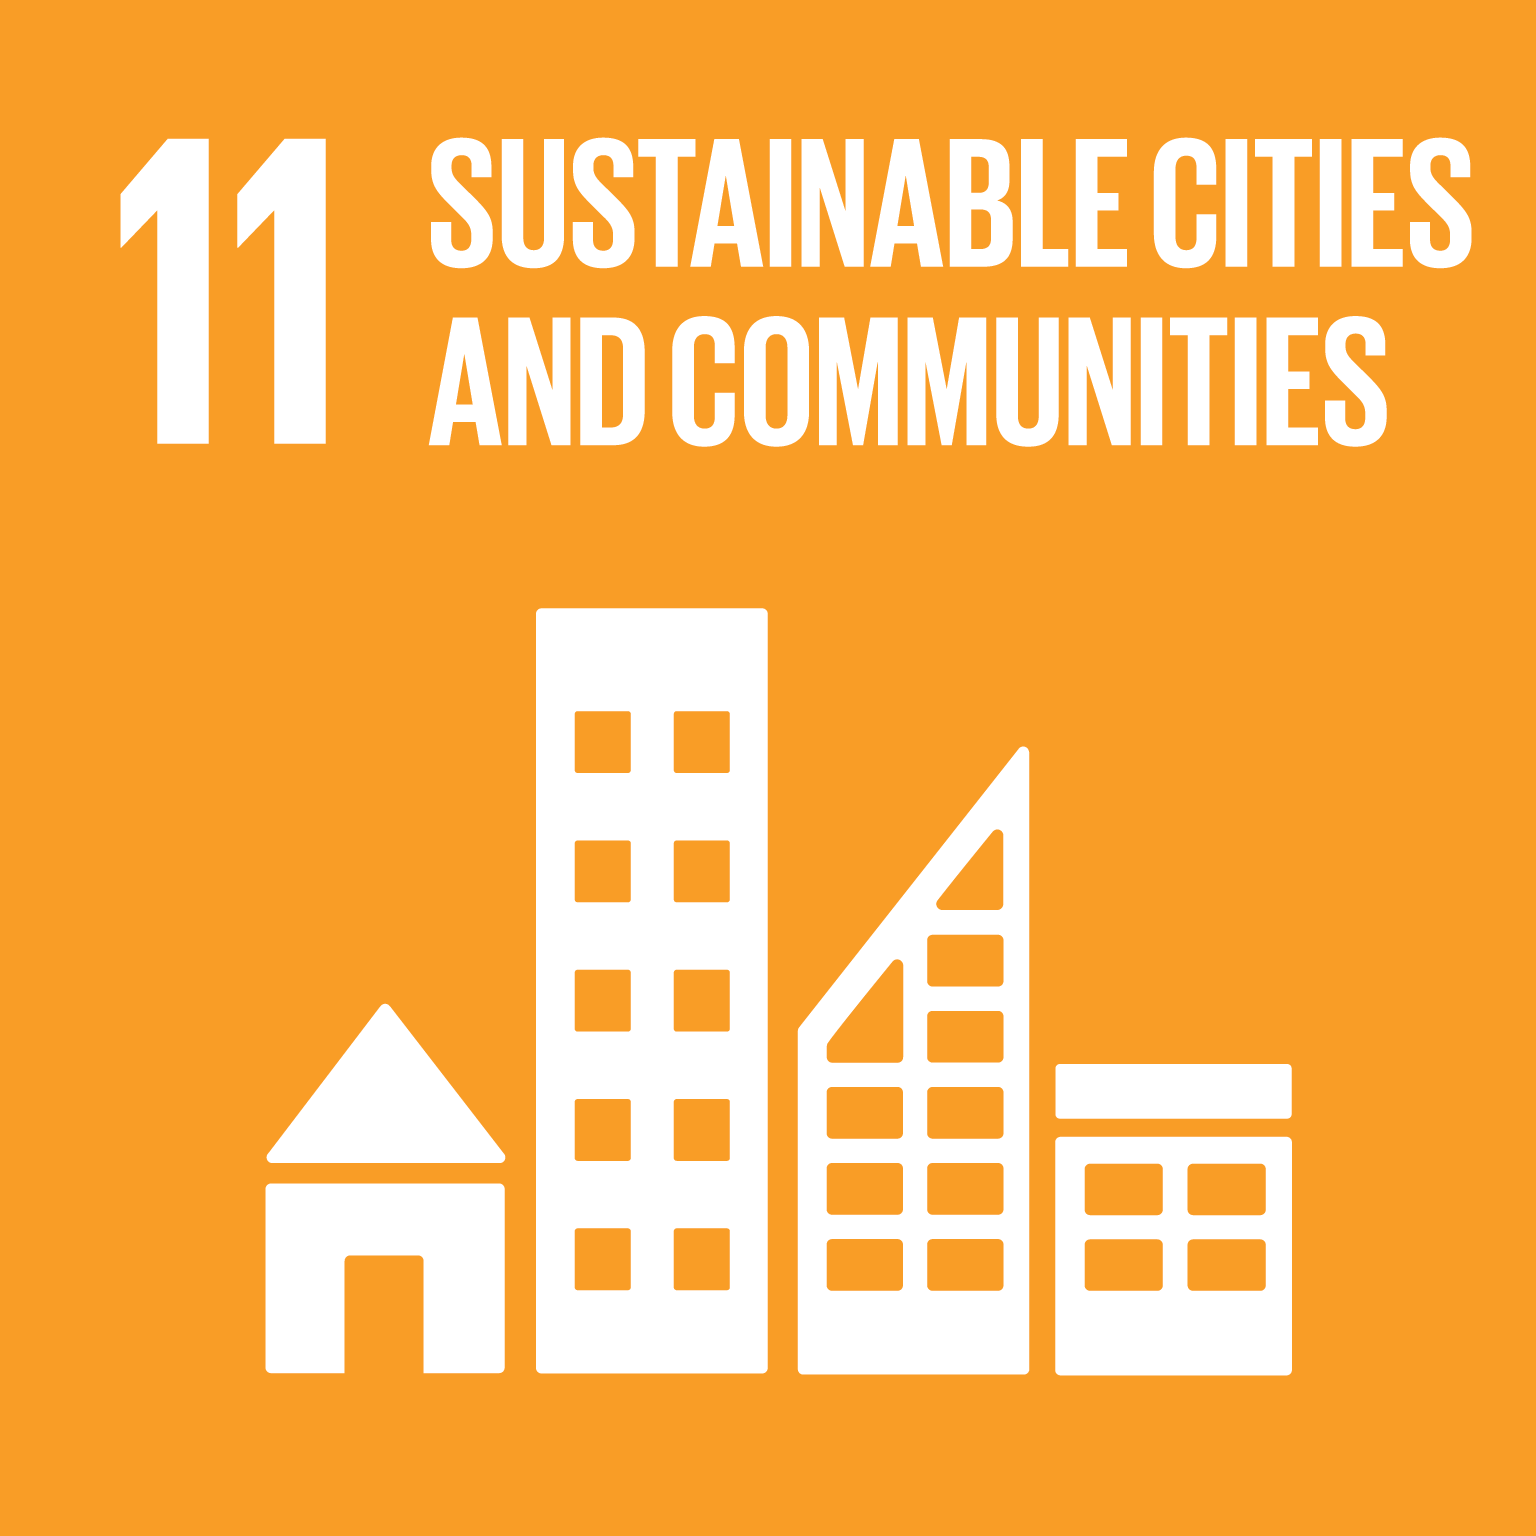 Goal 11. Sustainable cities and communities